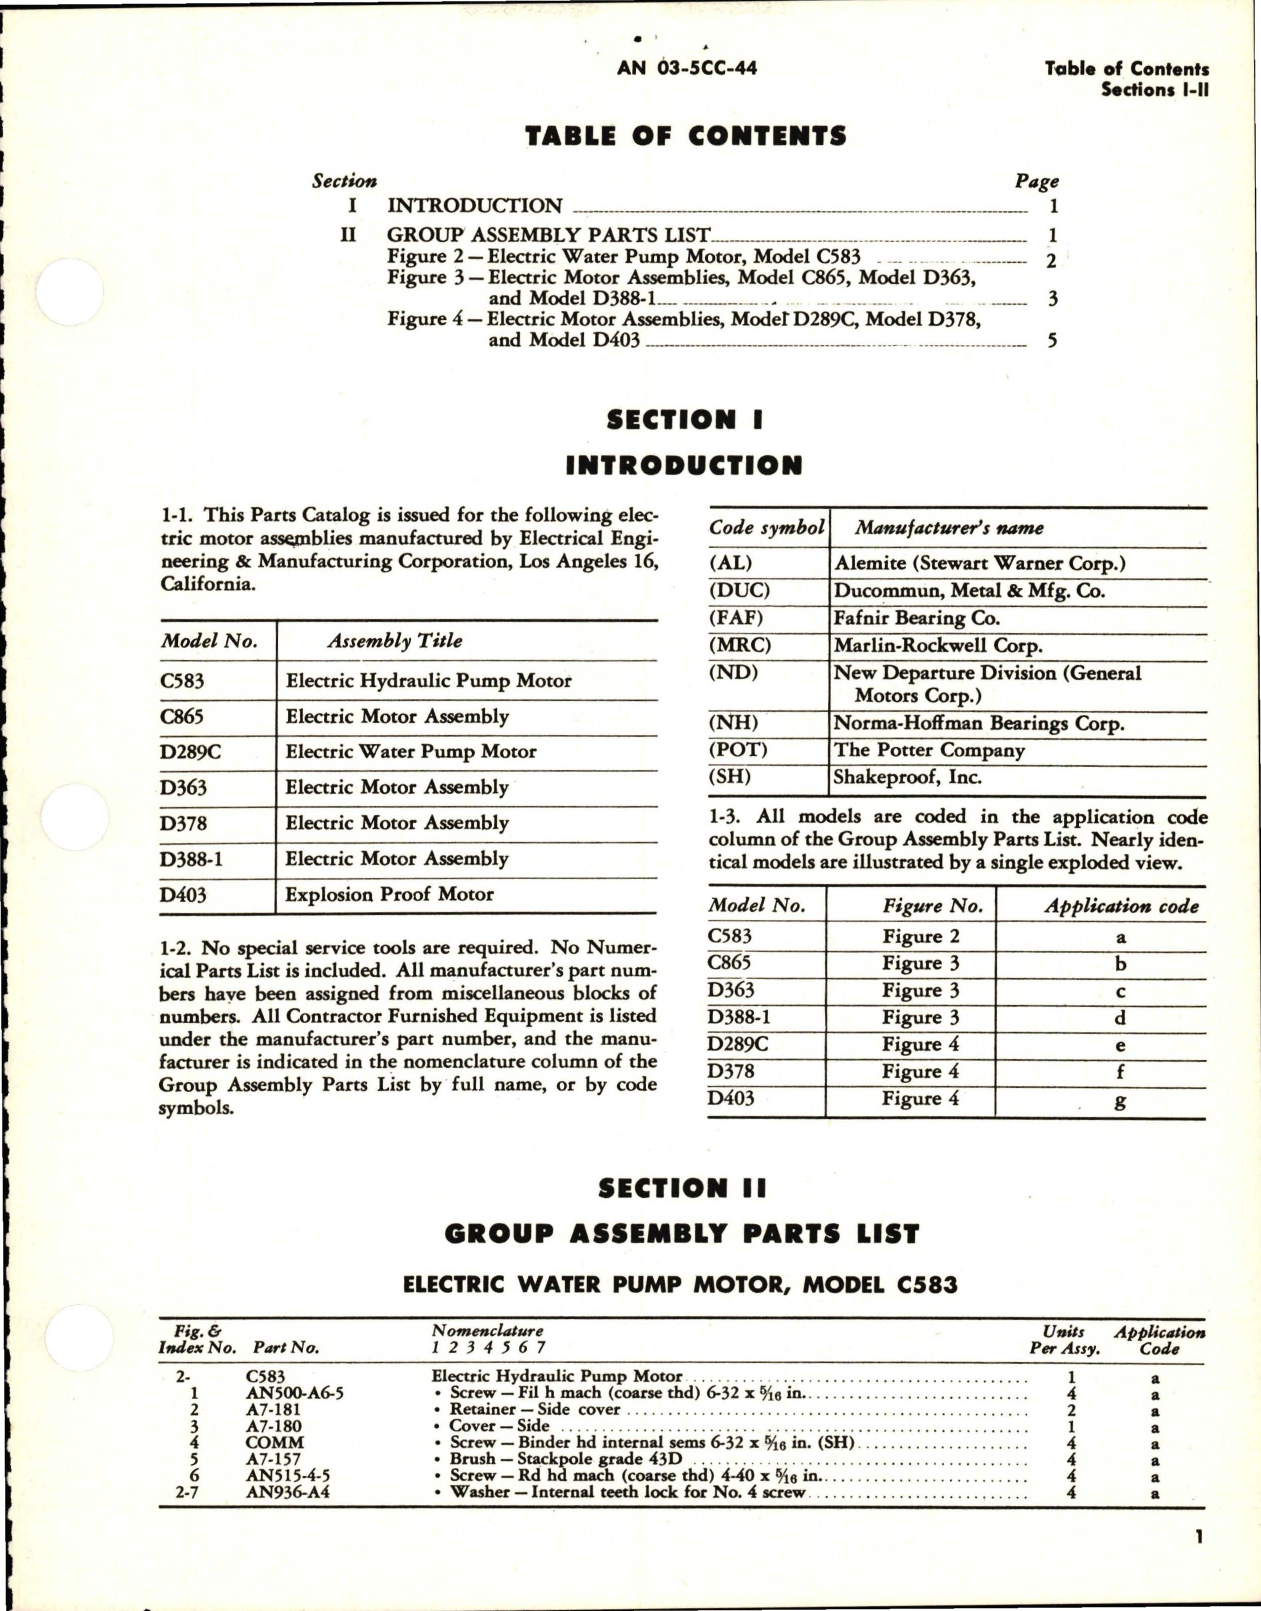 Sample page 5 from AirCorps Library document: Parts Catalog, Electric Motors - Models C583, D289C, D378, C865, D363, D388-1, and D403